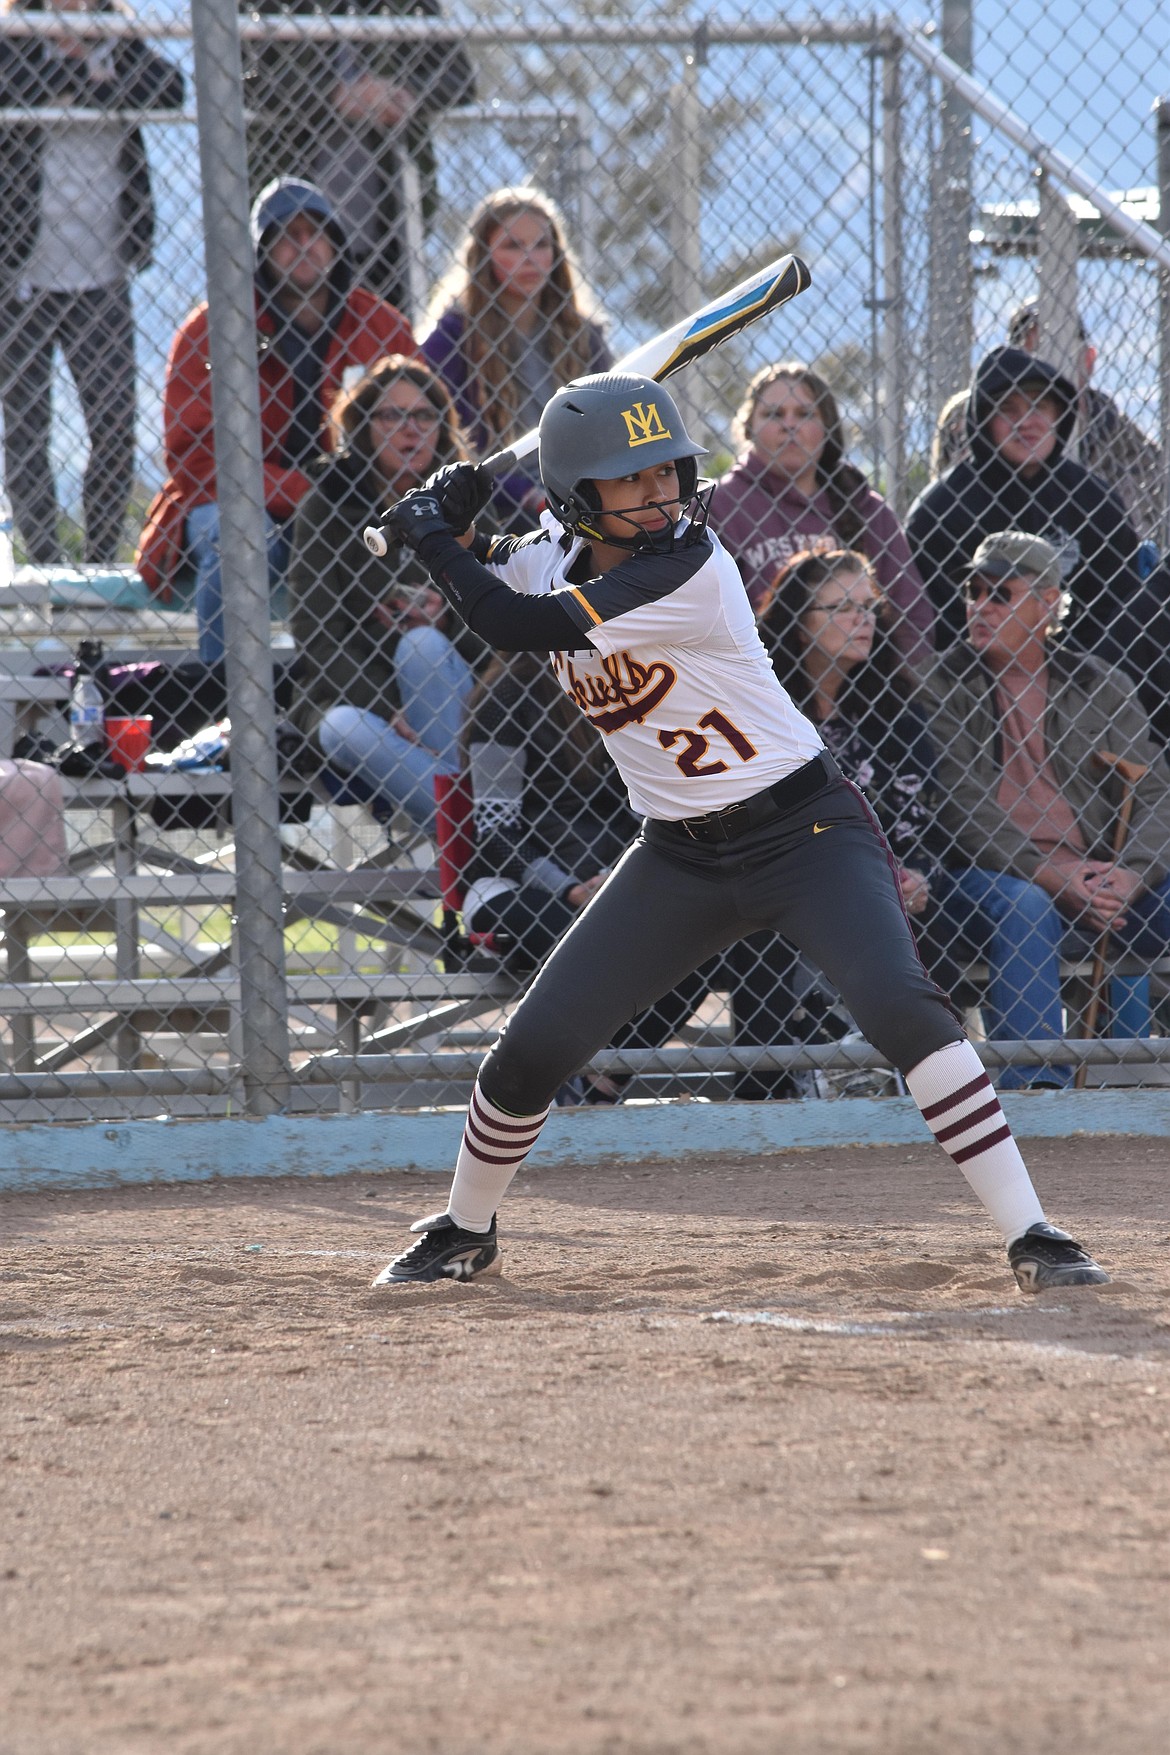 Junior Jazlynn Torres (21) goes to bat for the Lady Chiefs.